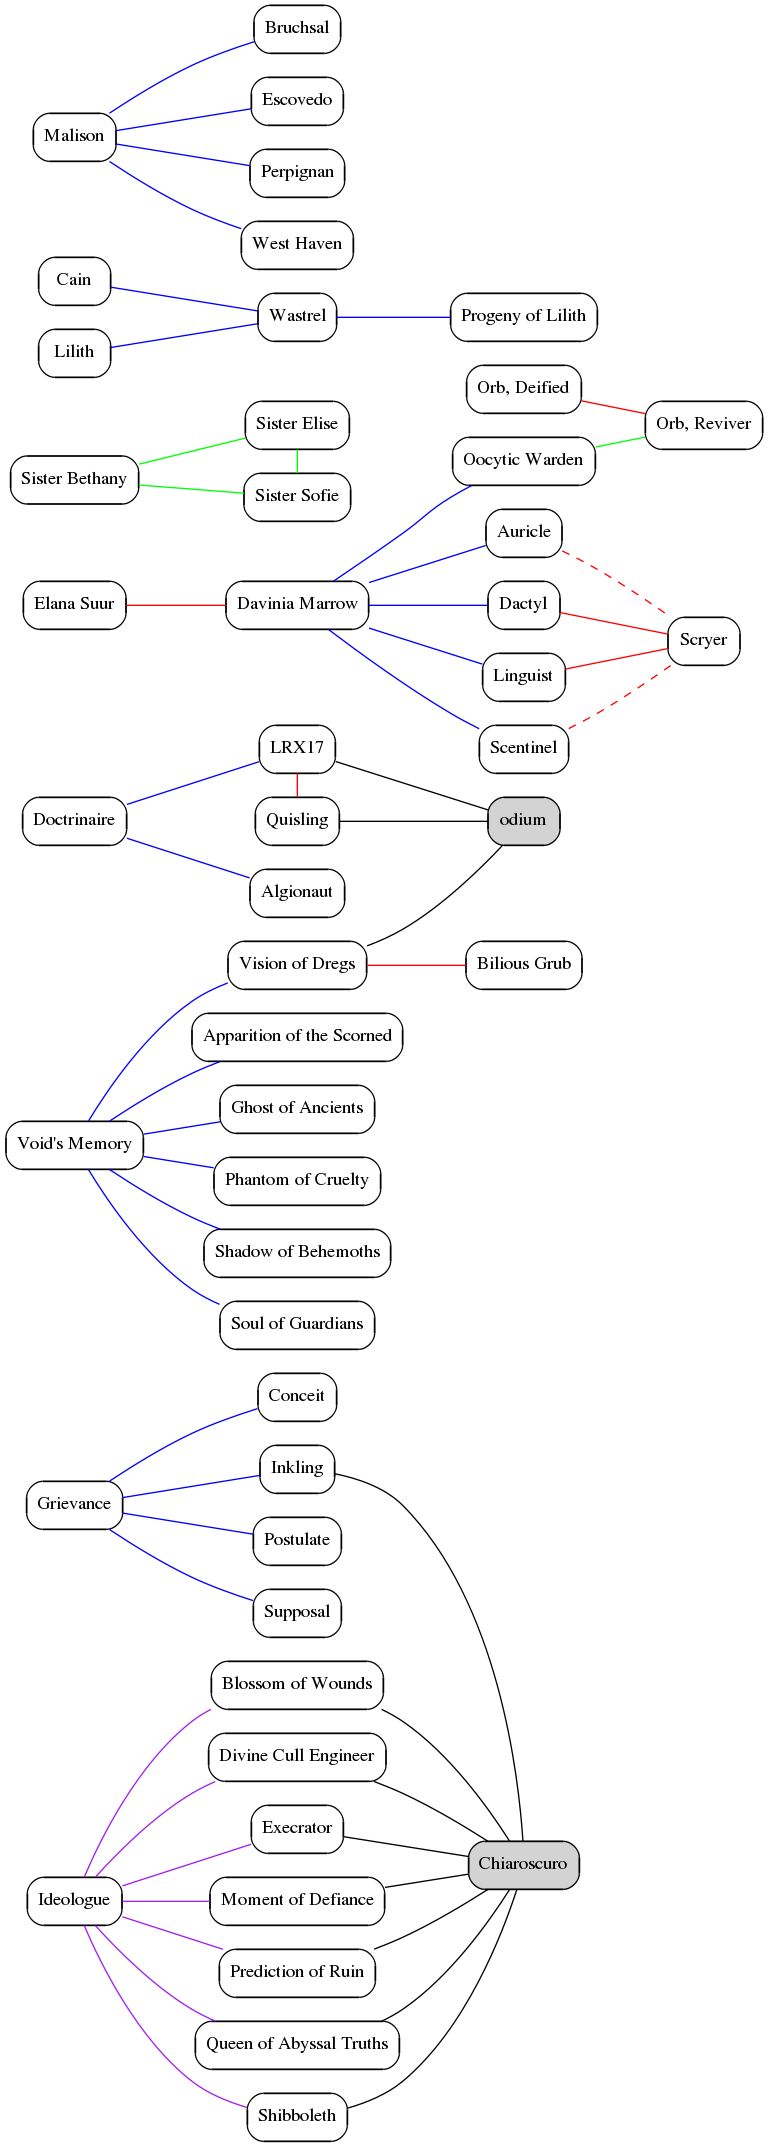 Lusus Naturae Relationship Map. Blue lines mean 'created', green is 'likes/allies', red is 'hates/enmity', purple is 'summoned', black is 'other'. Dashed lines mean the link is mentioned elsewhere but not directly where used. The two grey nodes indicate non-monster elements that are mentioned by more than one monster.)